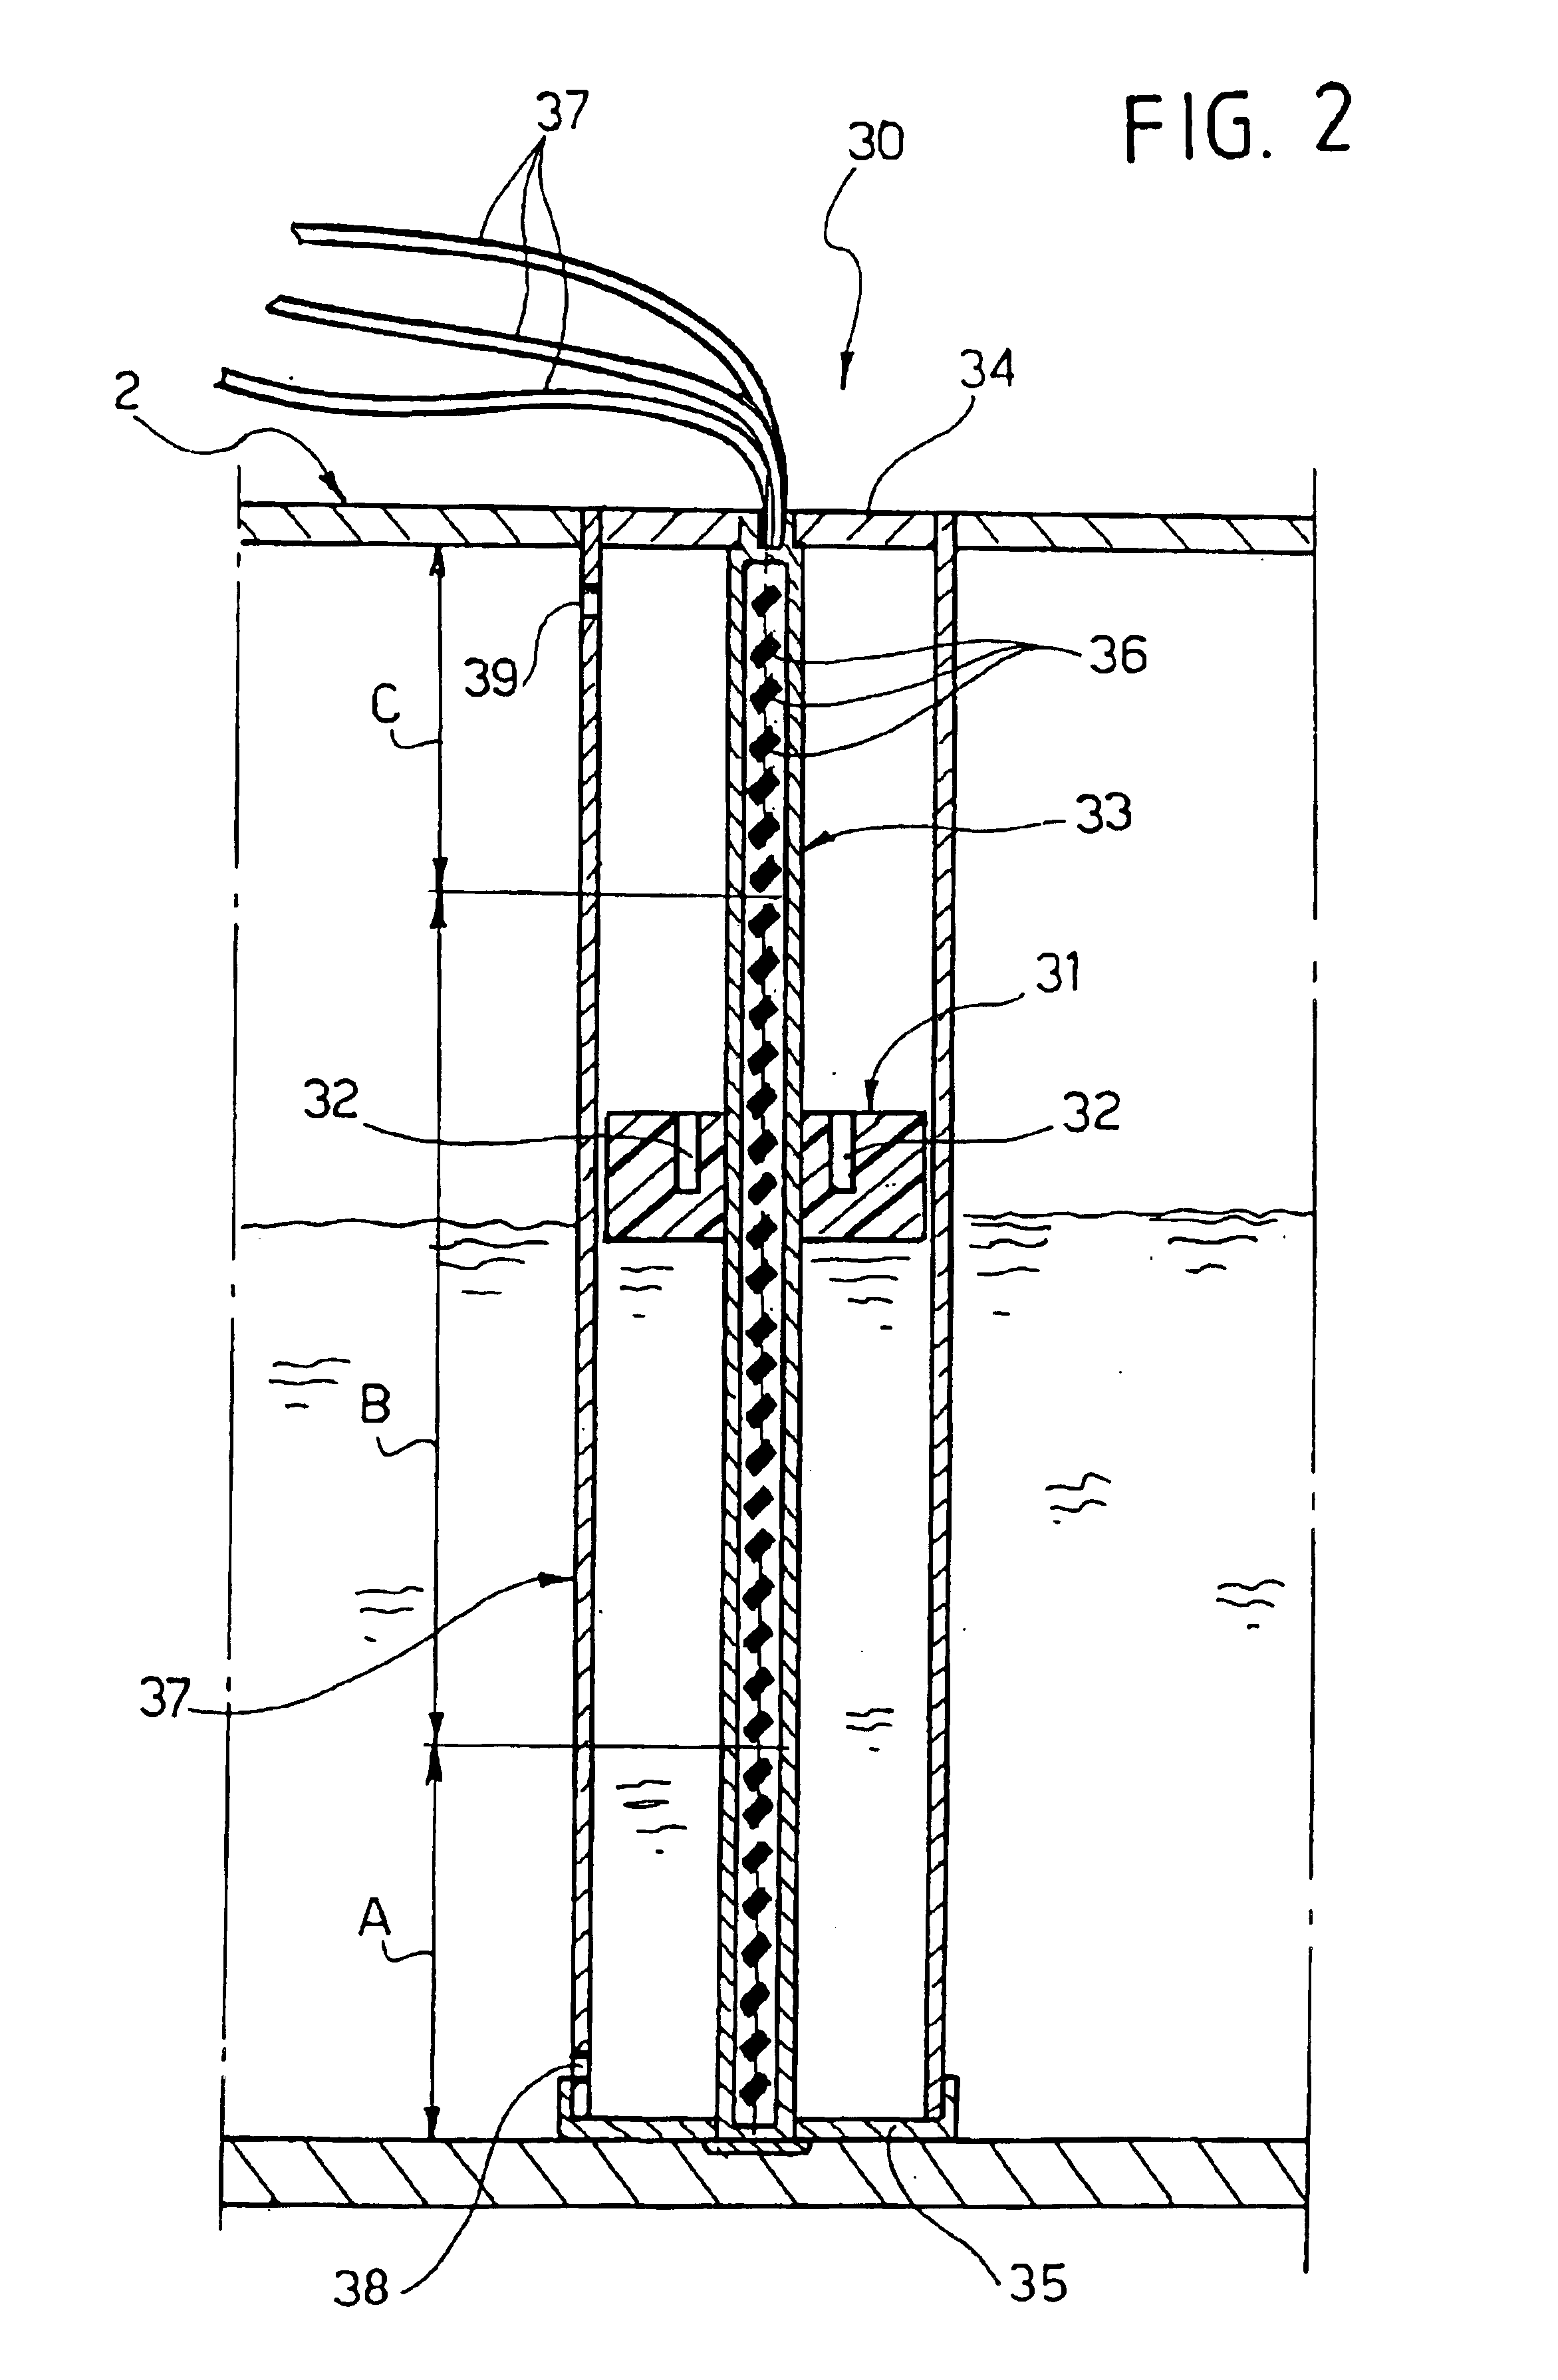 Level-sensor device for a liquid-fuel tank, particularly for a system for supplying LPG to an internal-combustion engine